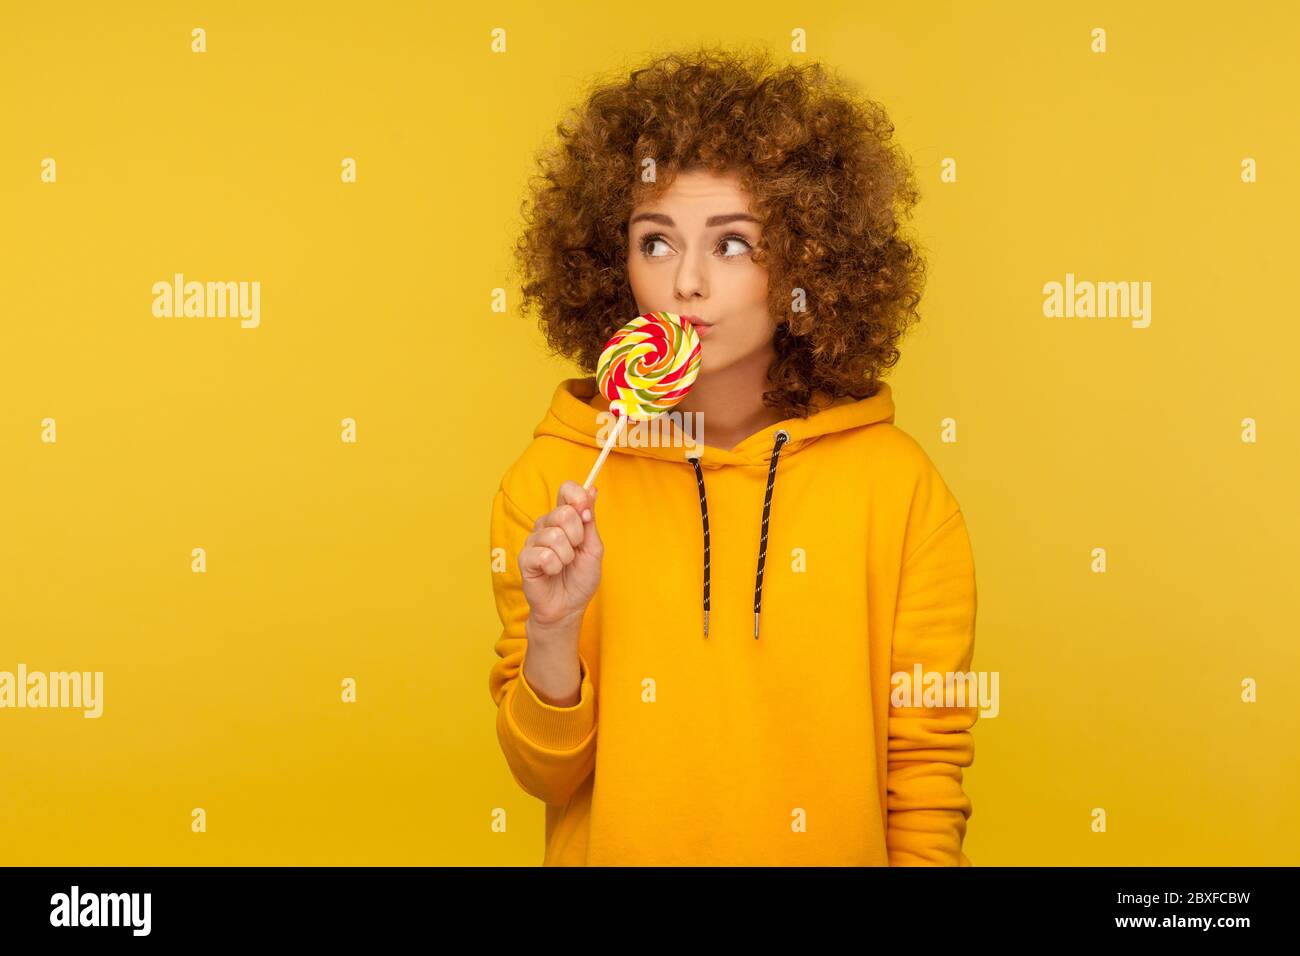 Portrait of pensive curly-haired woman in urban style hoodie licking lollipop, enjoying sweet rainbow candy and looking away with thoughtful expressio Stock Photo